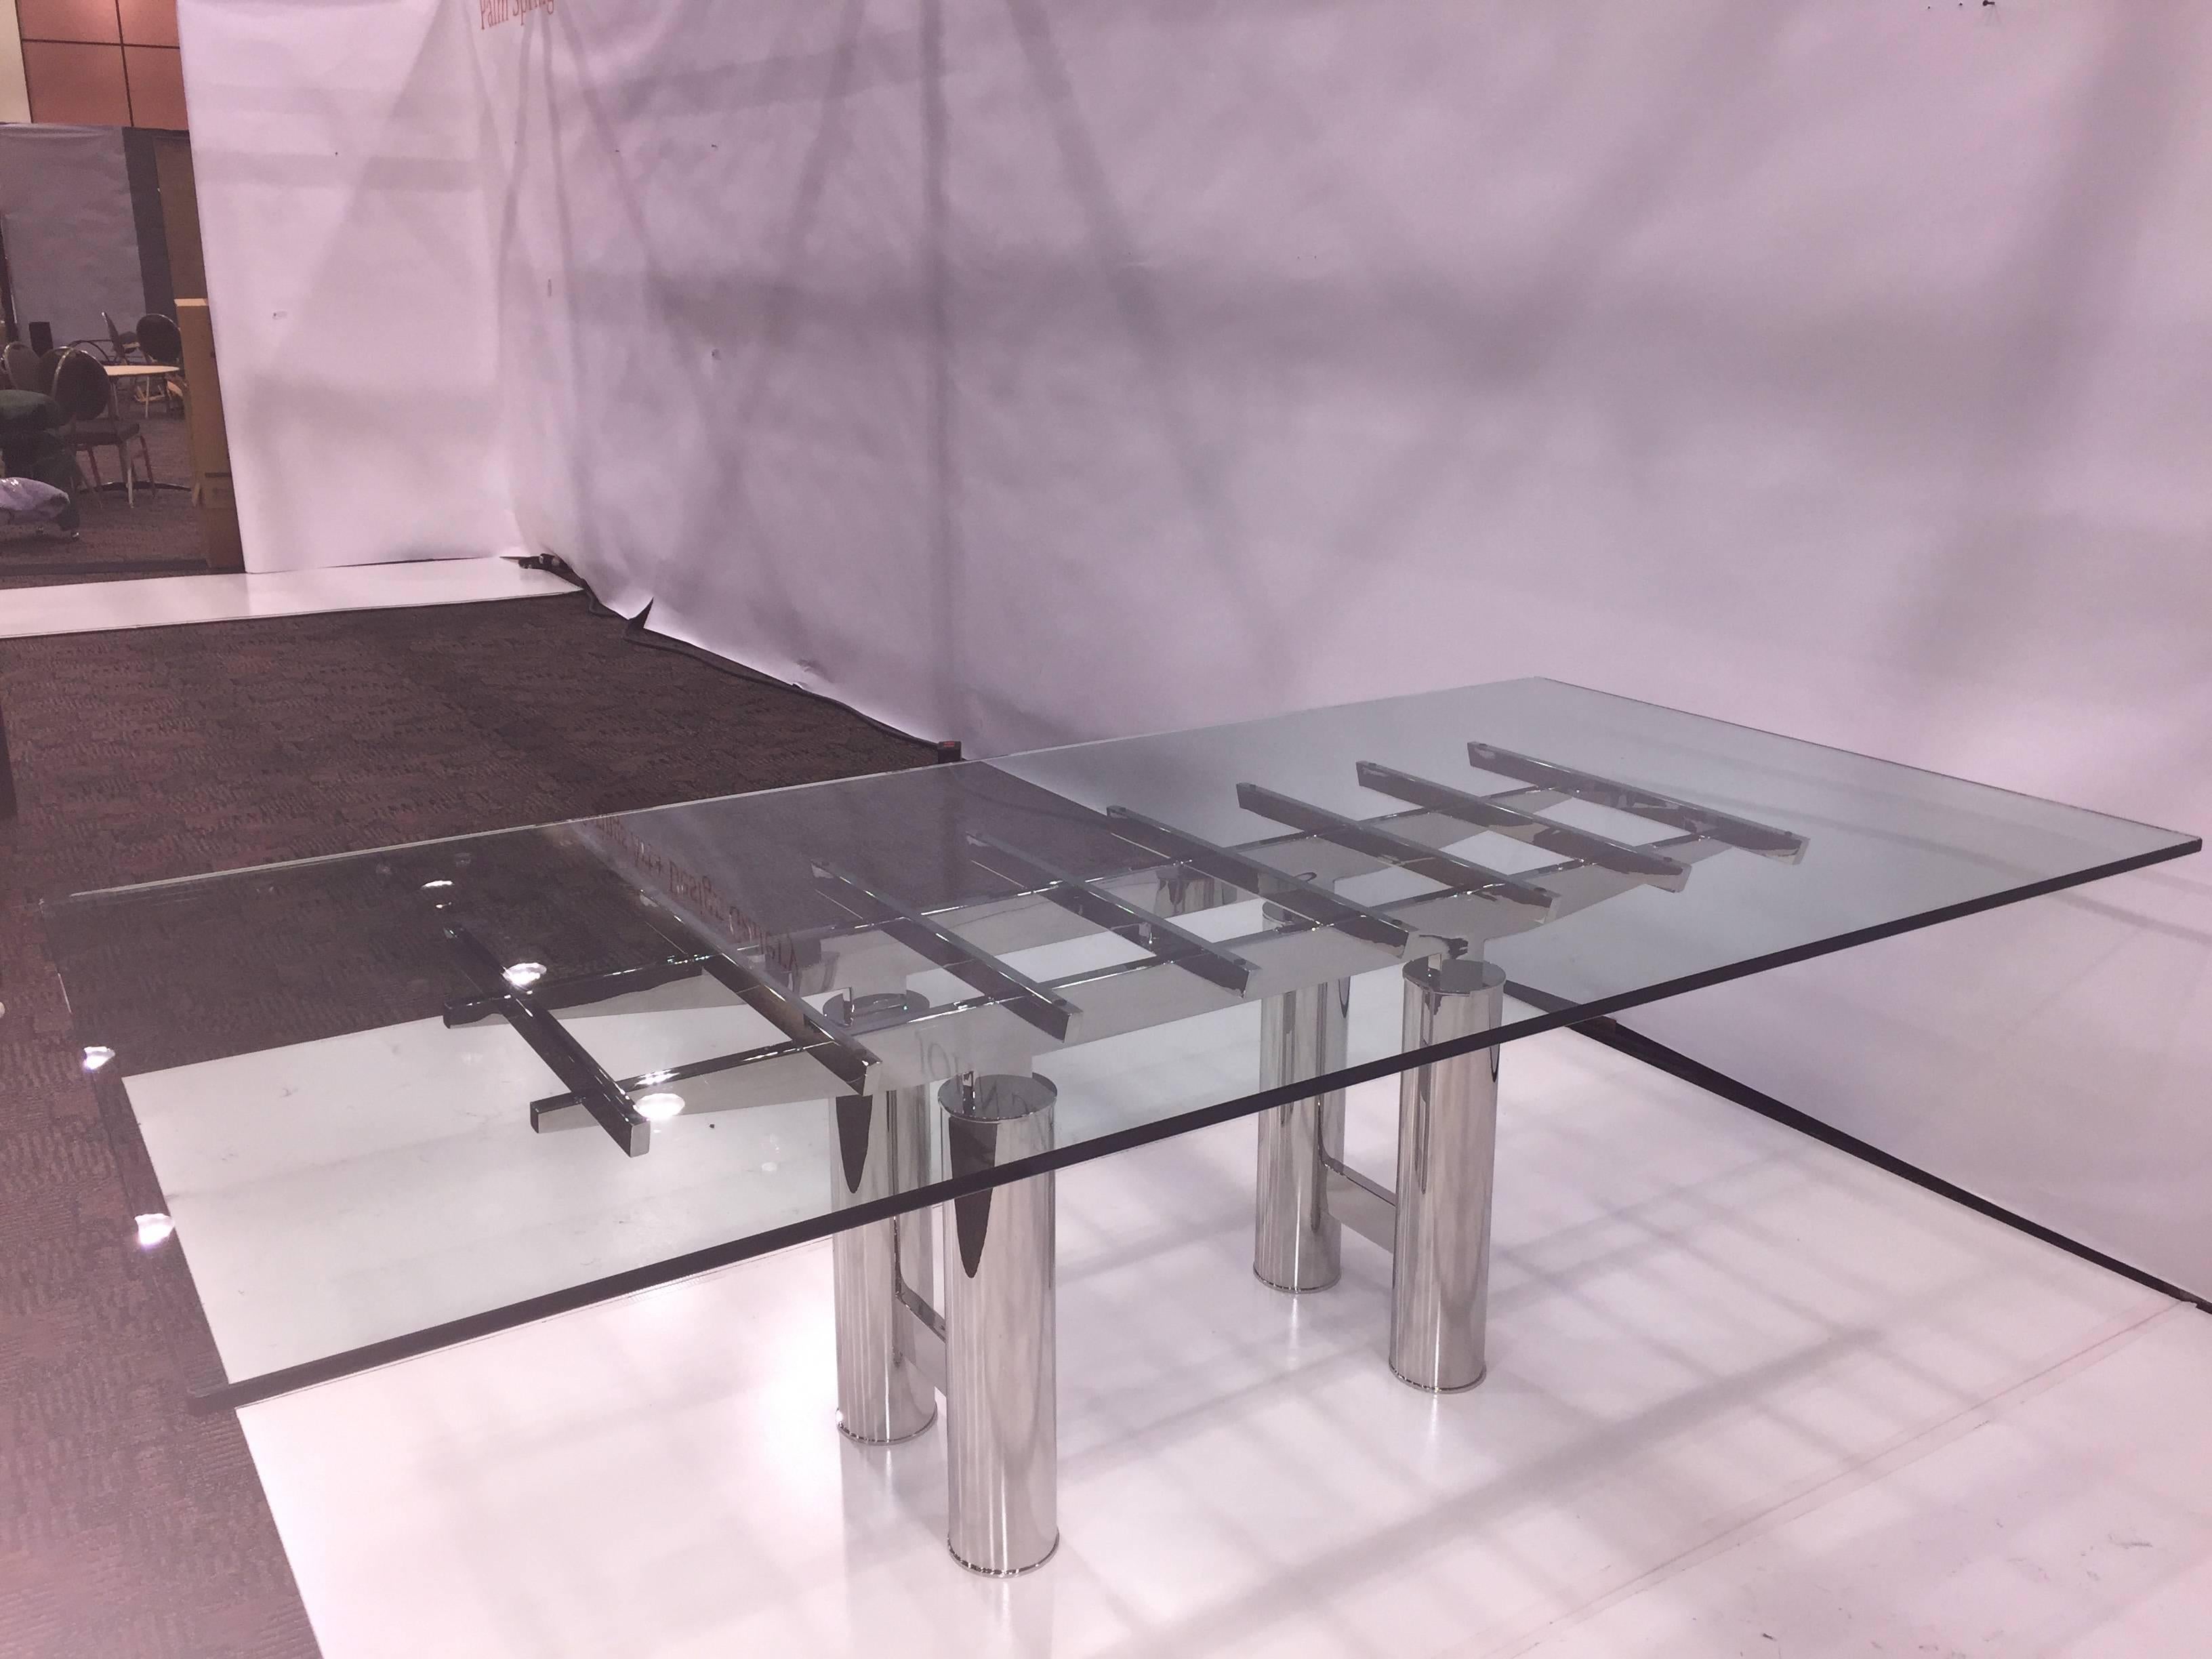 A stunning mirror finish stainless steel Brueton dining table from the 1980s. The glass top measures approximately 48 x 95.75 inches and is in good condition with some minor surface scratches. A visually striking design. The steel finish is in good